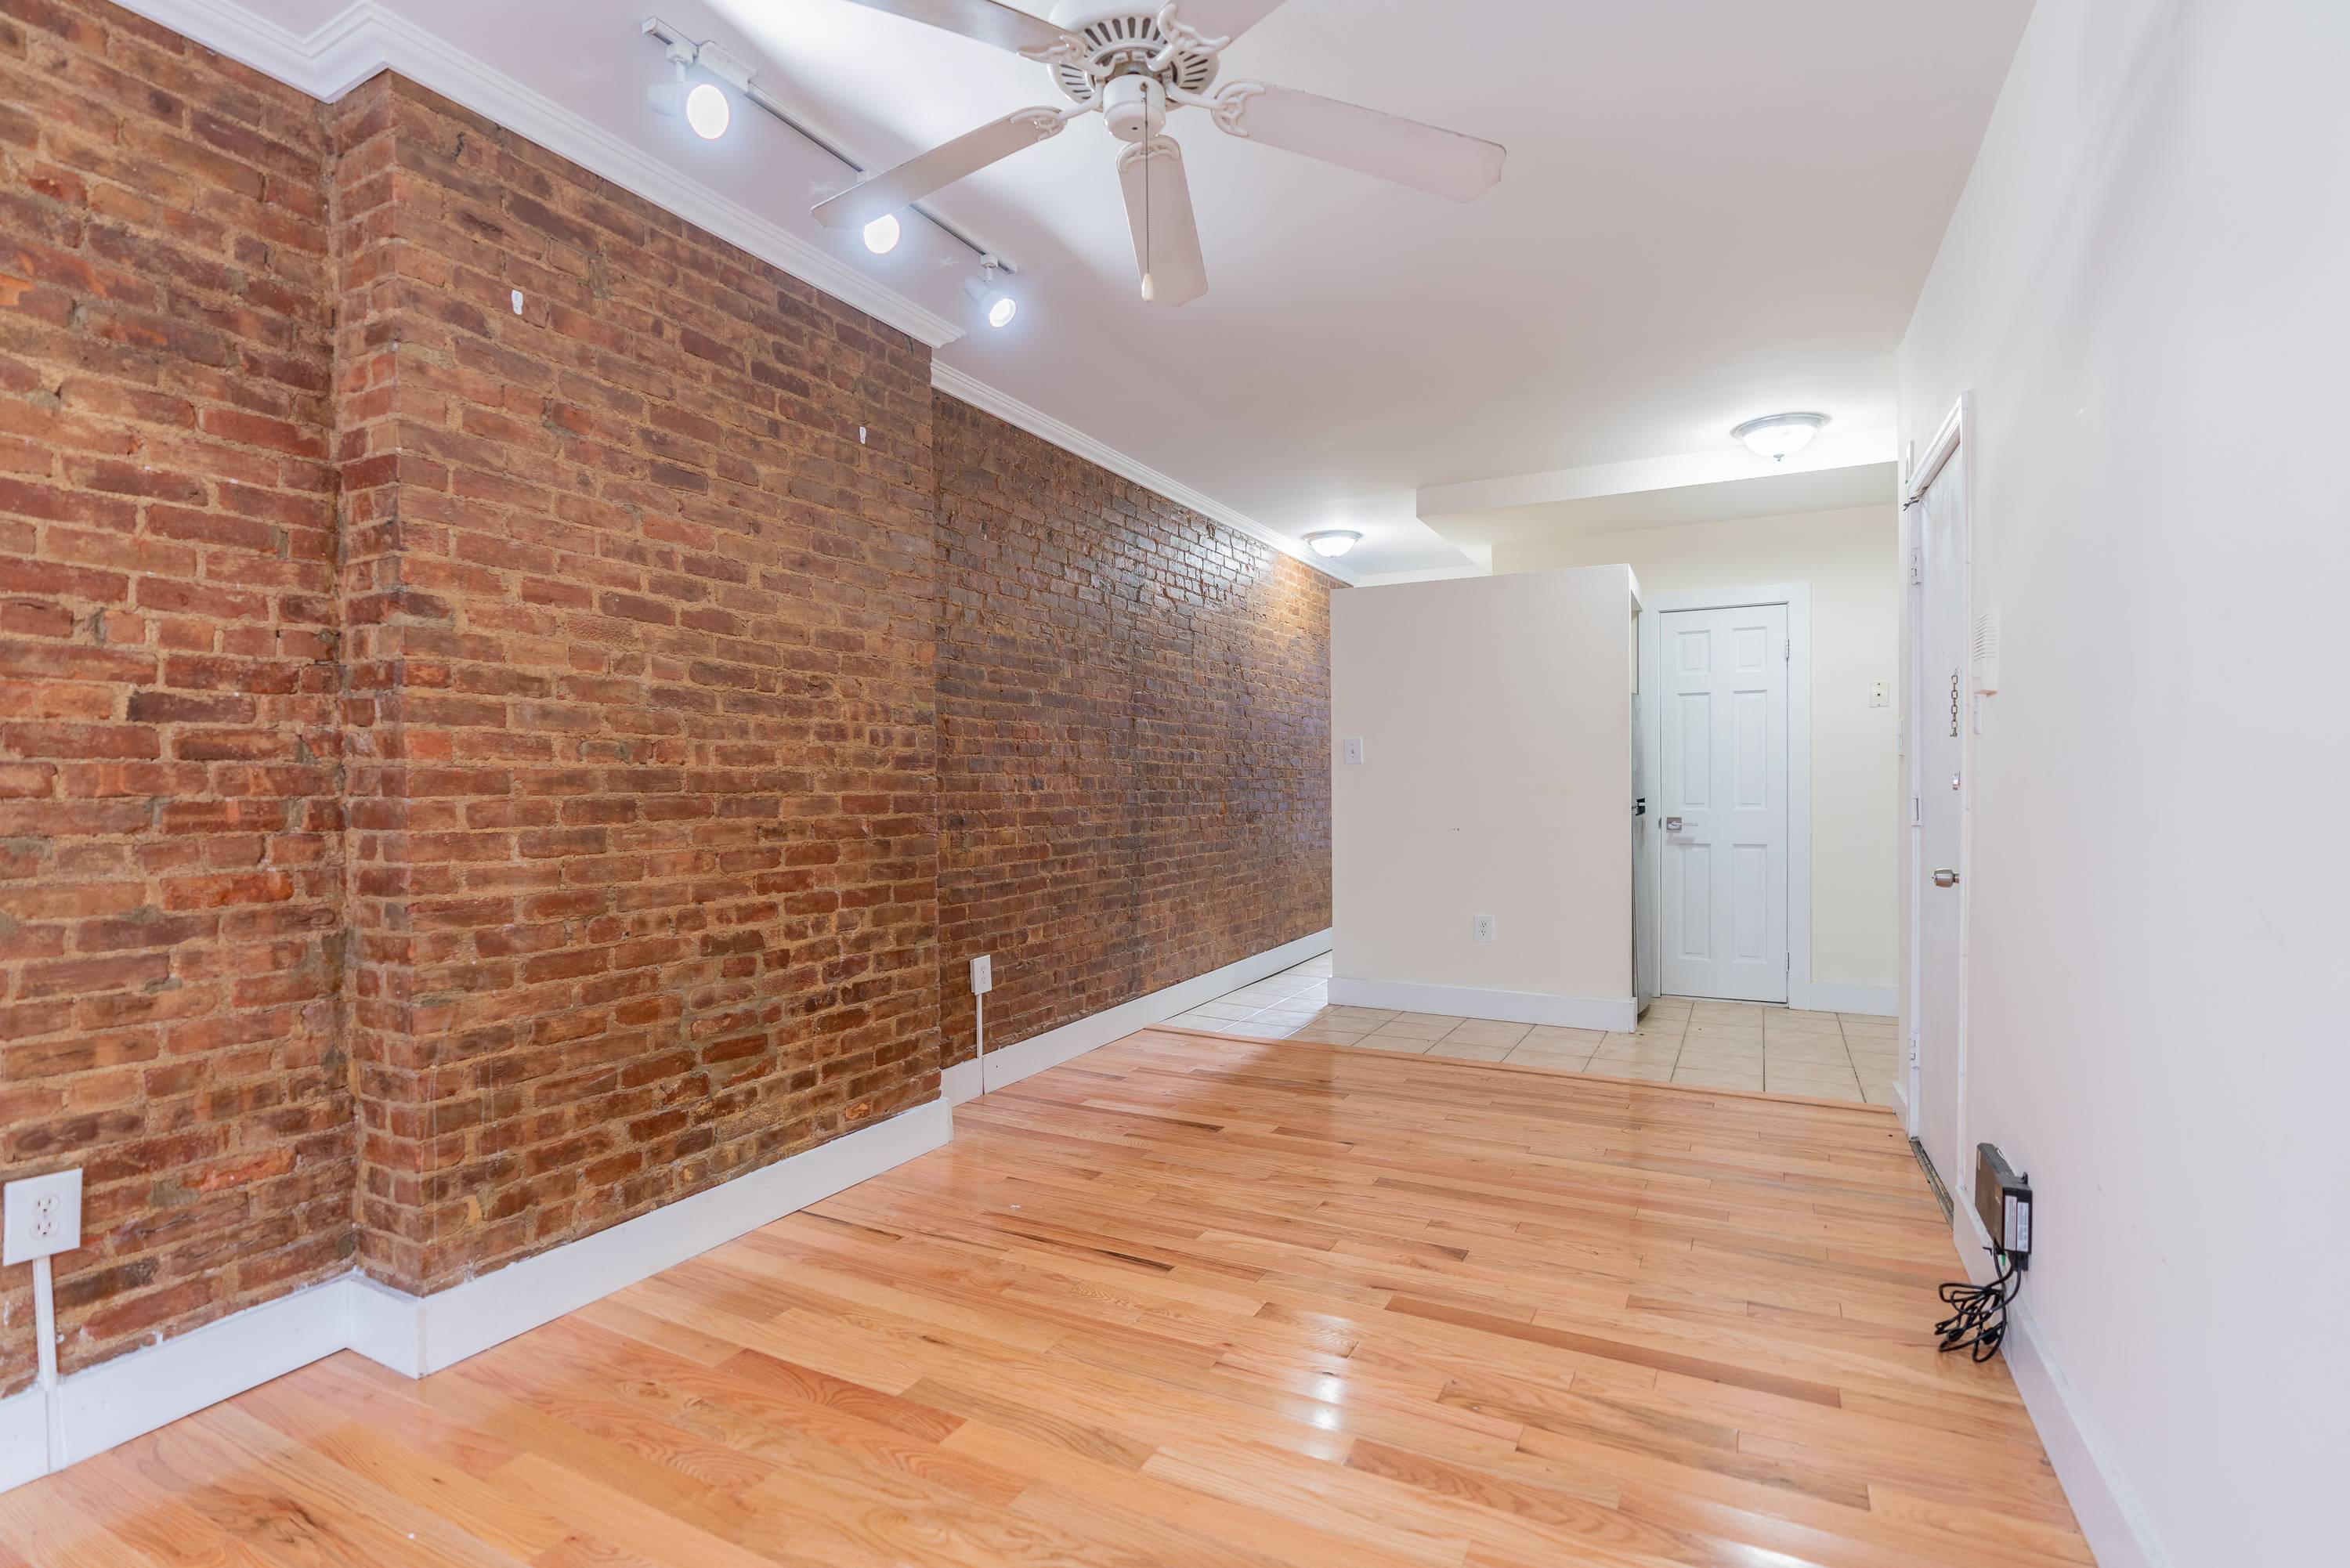 Studio in Prime Journal Square Location! Laundry on Site, Seconds to the Journal Square Path Transportation Center!